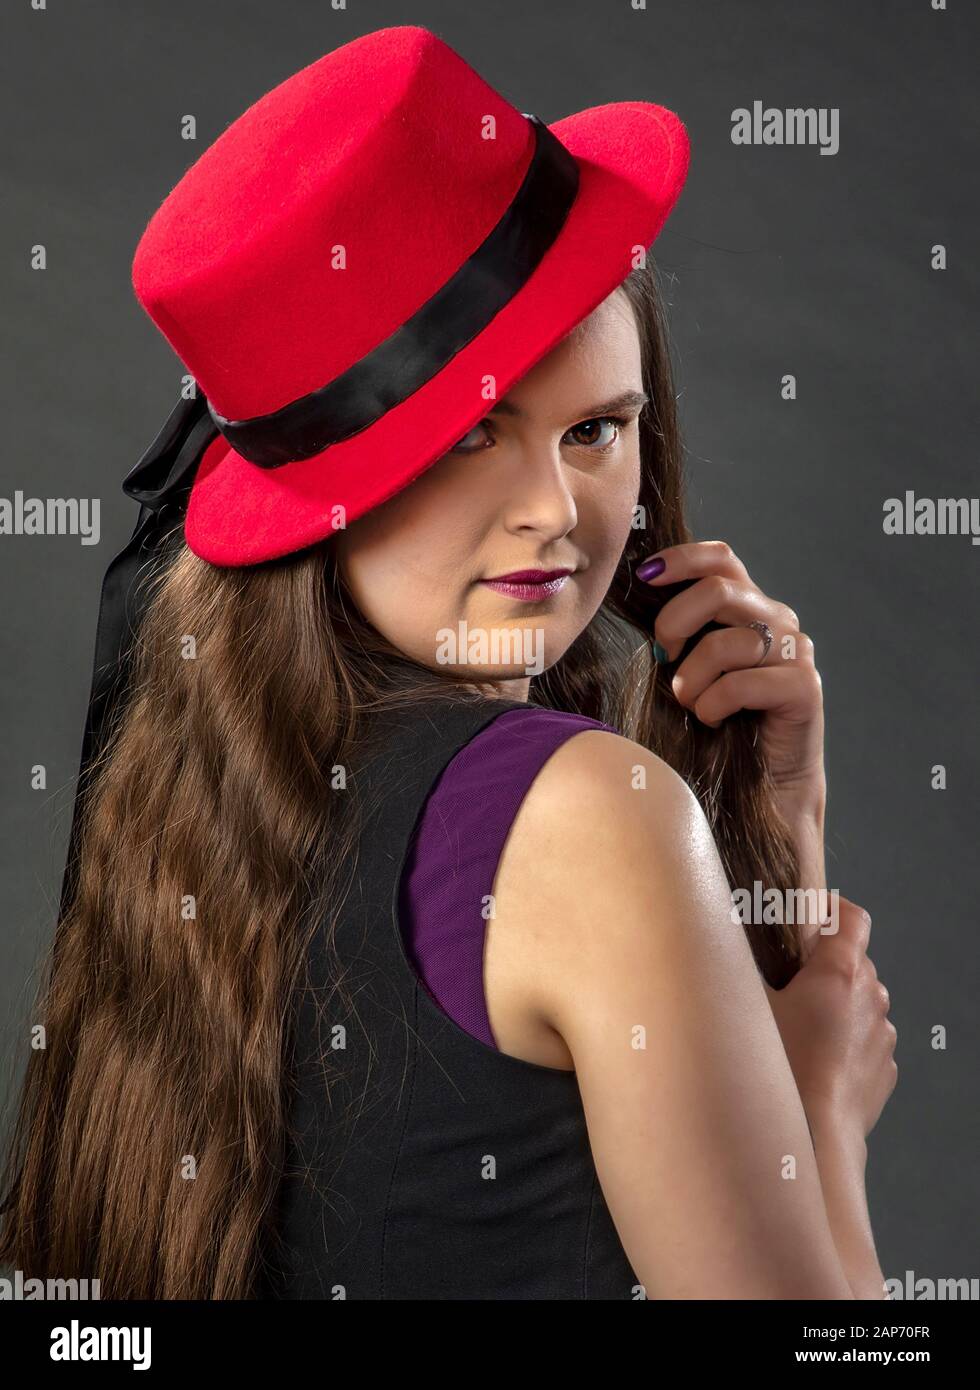 Samantha - internationally renowned classically trained soprano singer with a worldwide following. Stock Photo